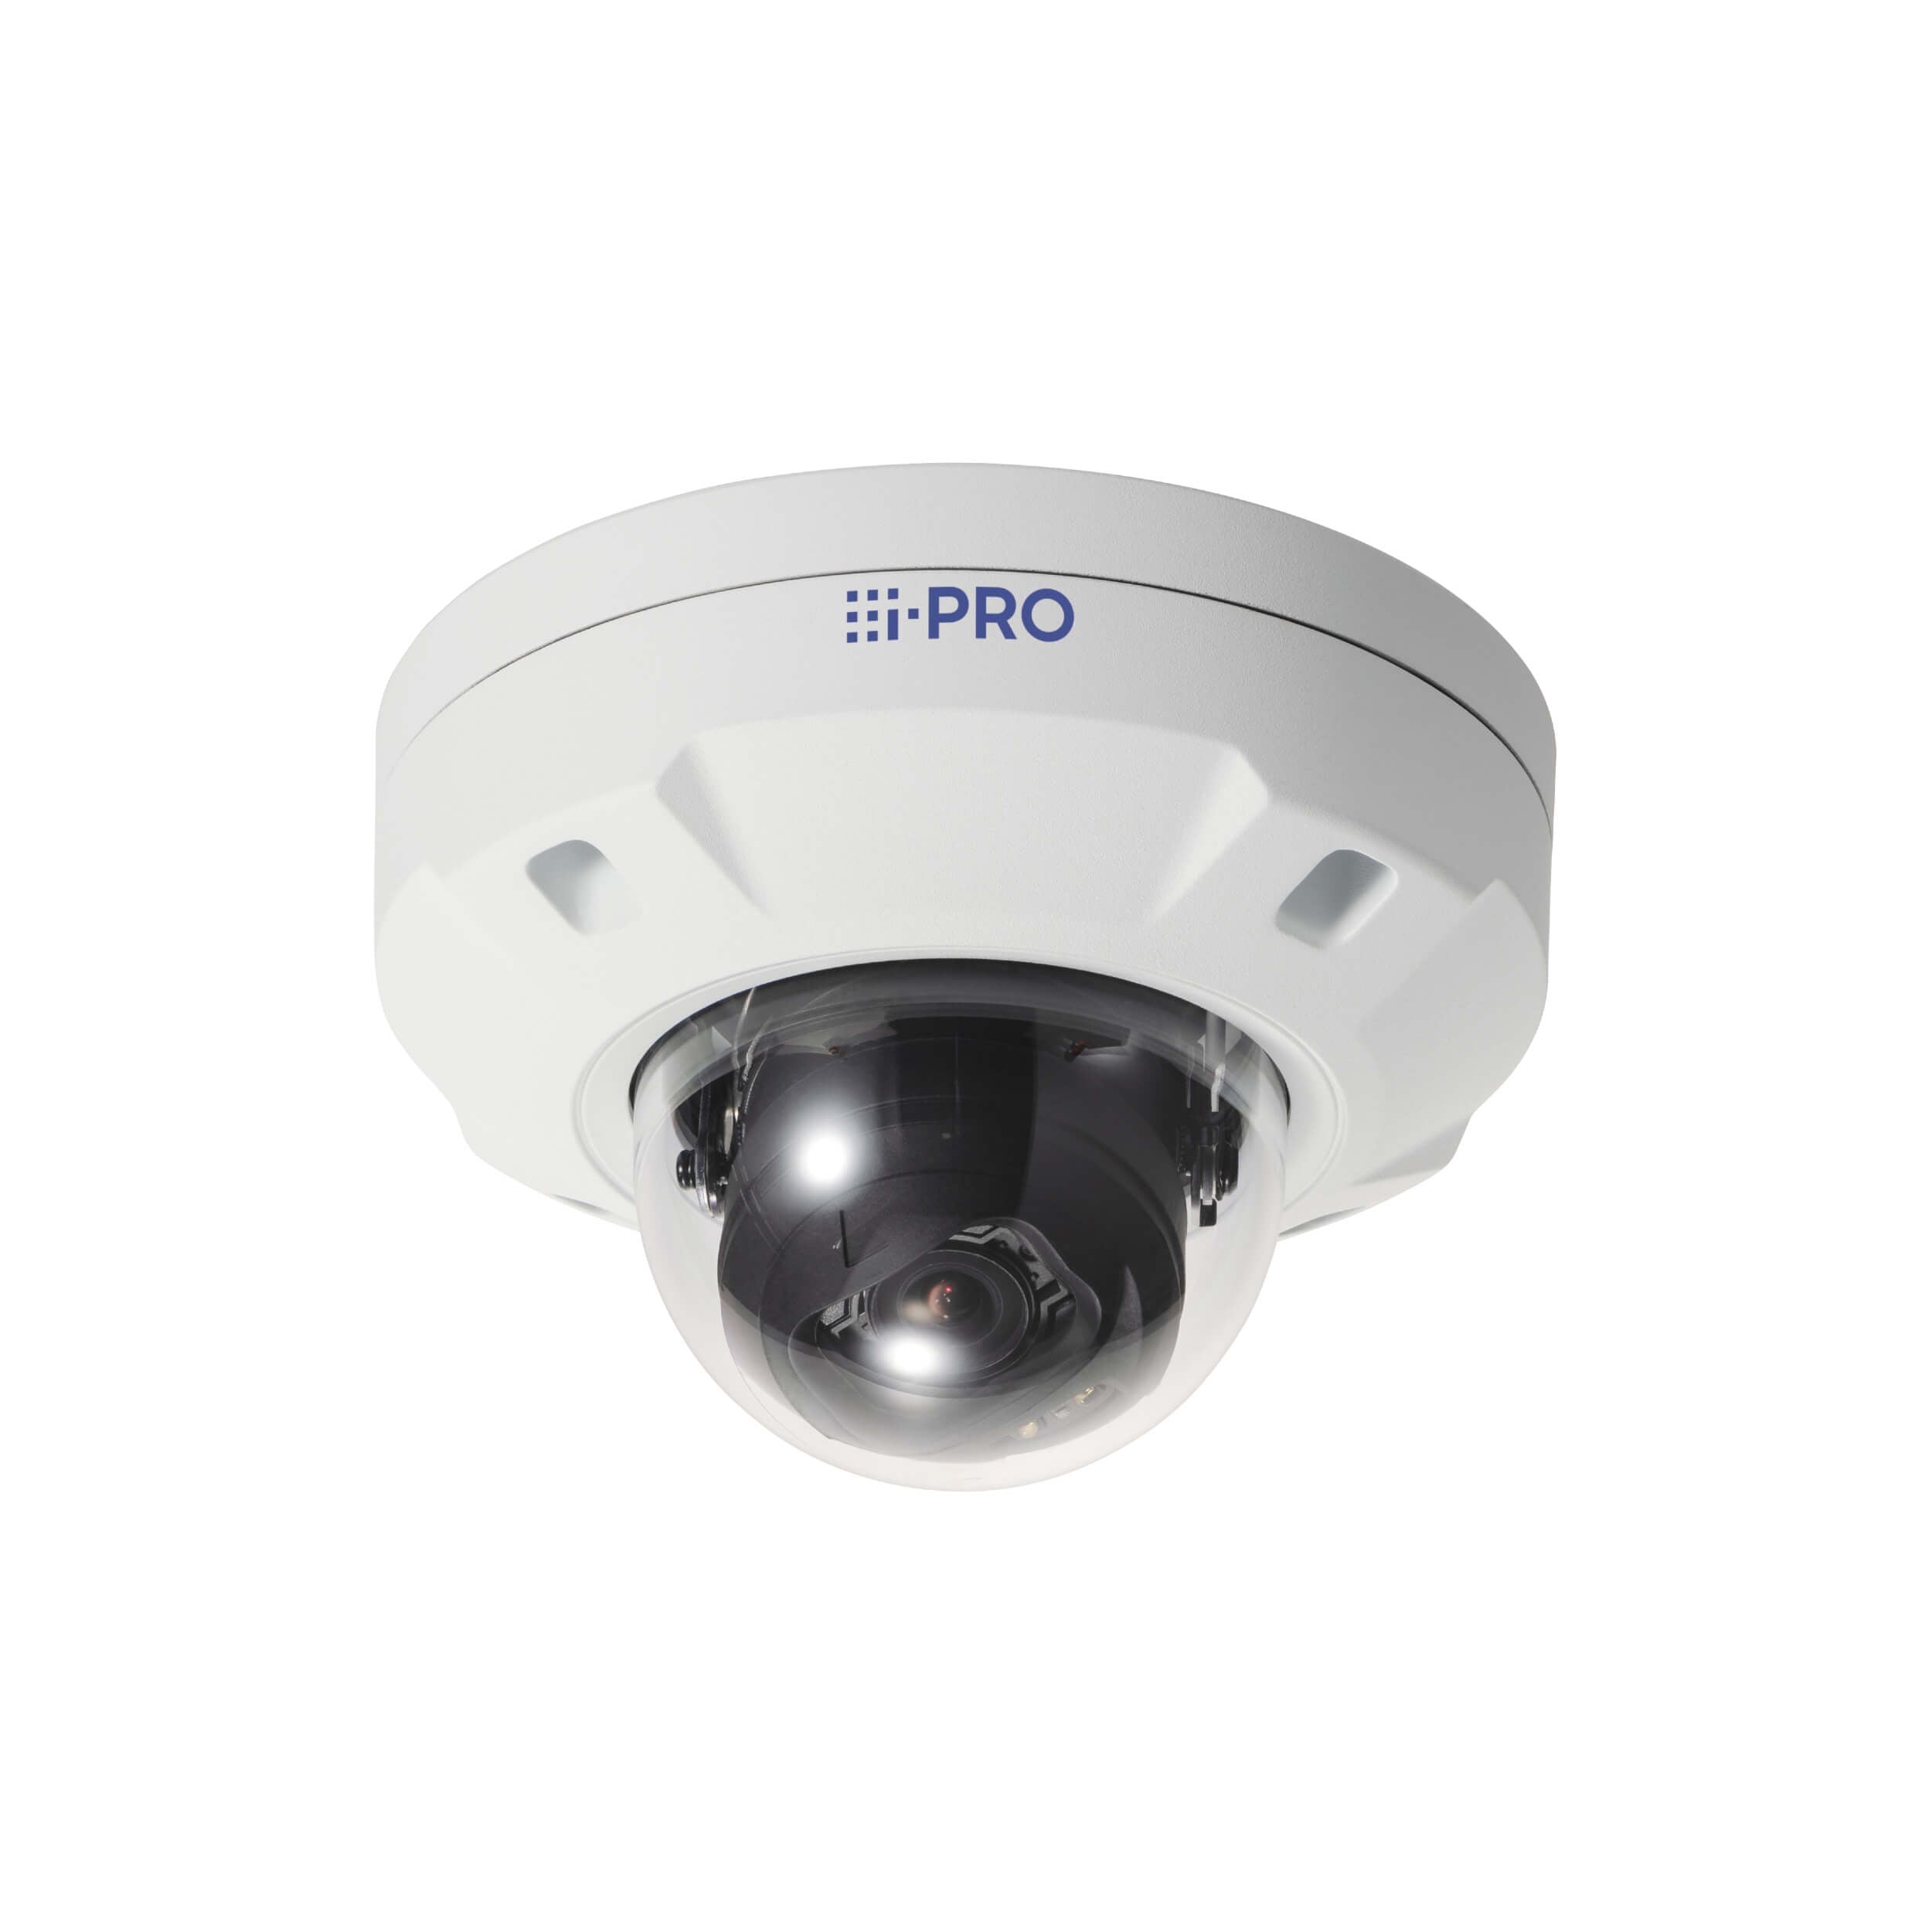 Panasonic WV-S25500-F3L 5MP Vandal Resistant Outdoor Dome Network Camera with AI Engine with 3.2mm Lens